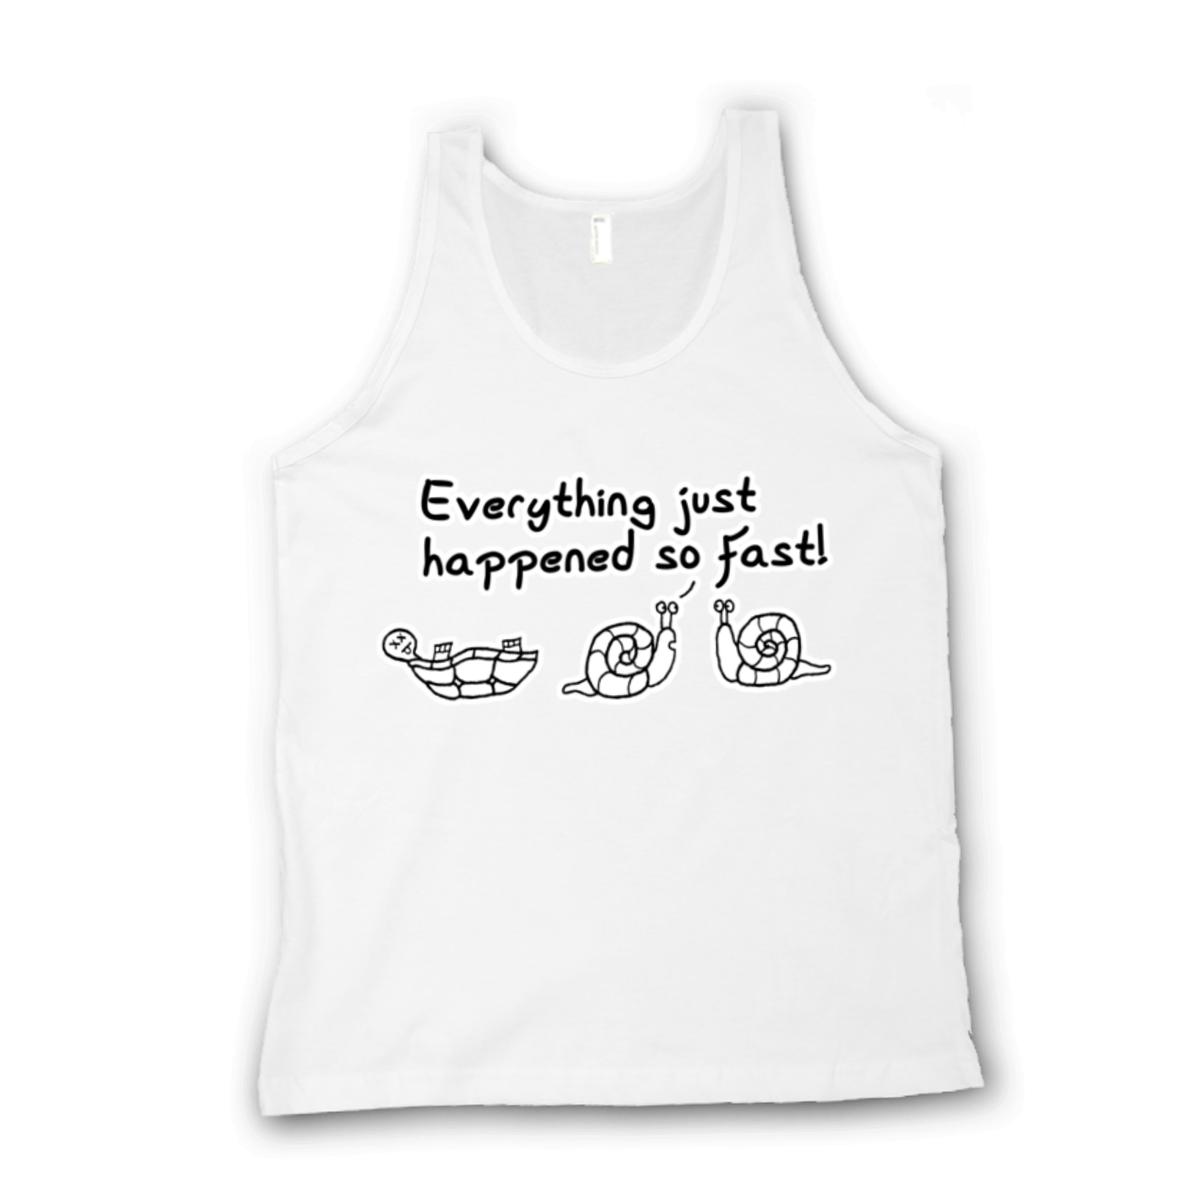 Happened So Fast Unisex Tank Top Extra Large white